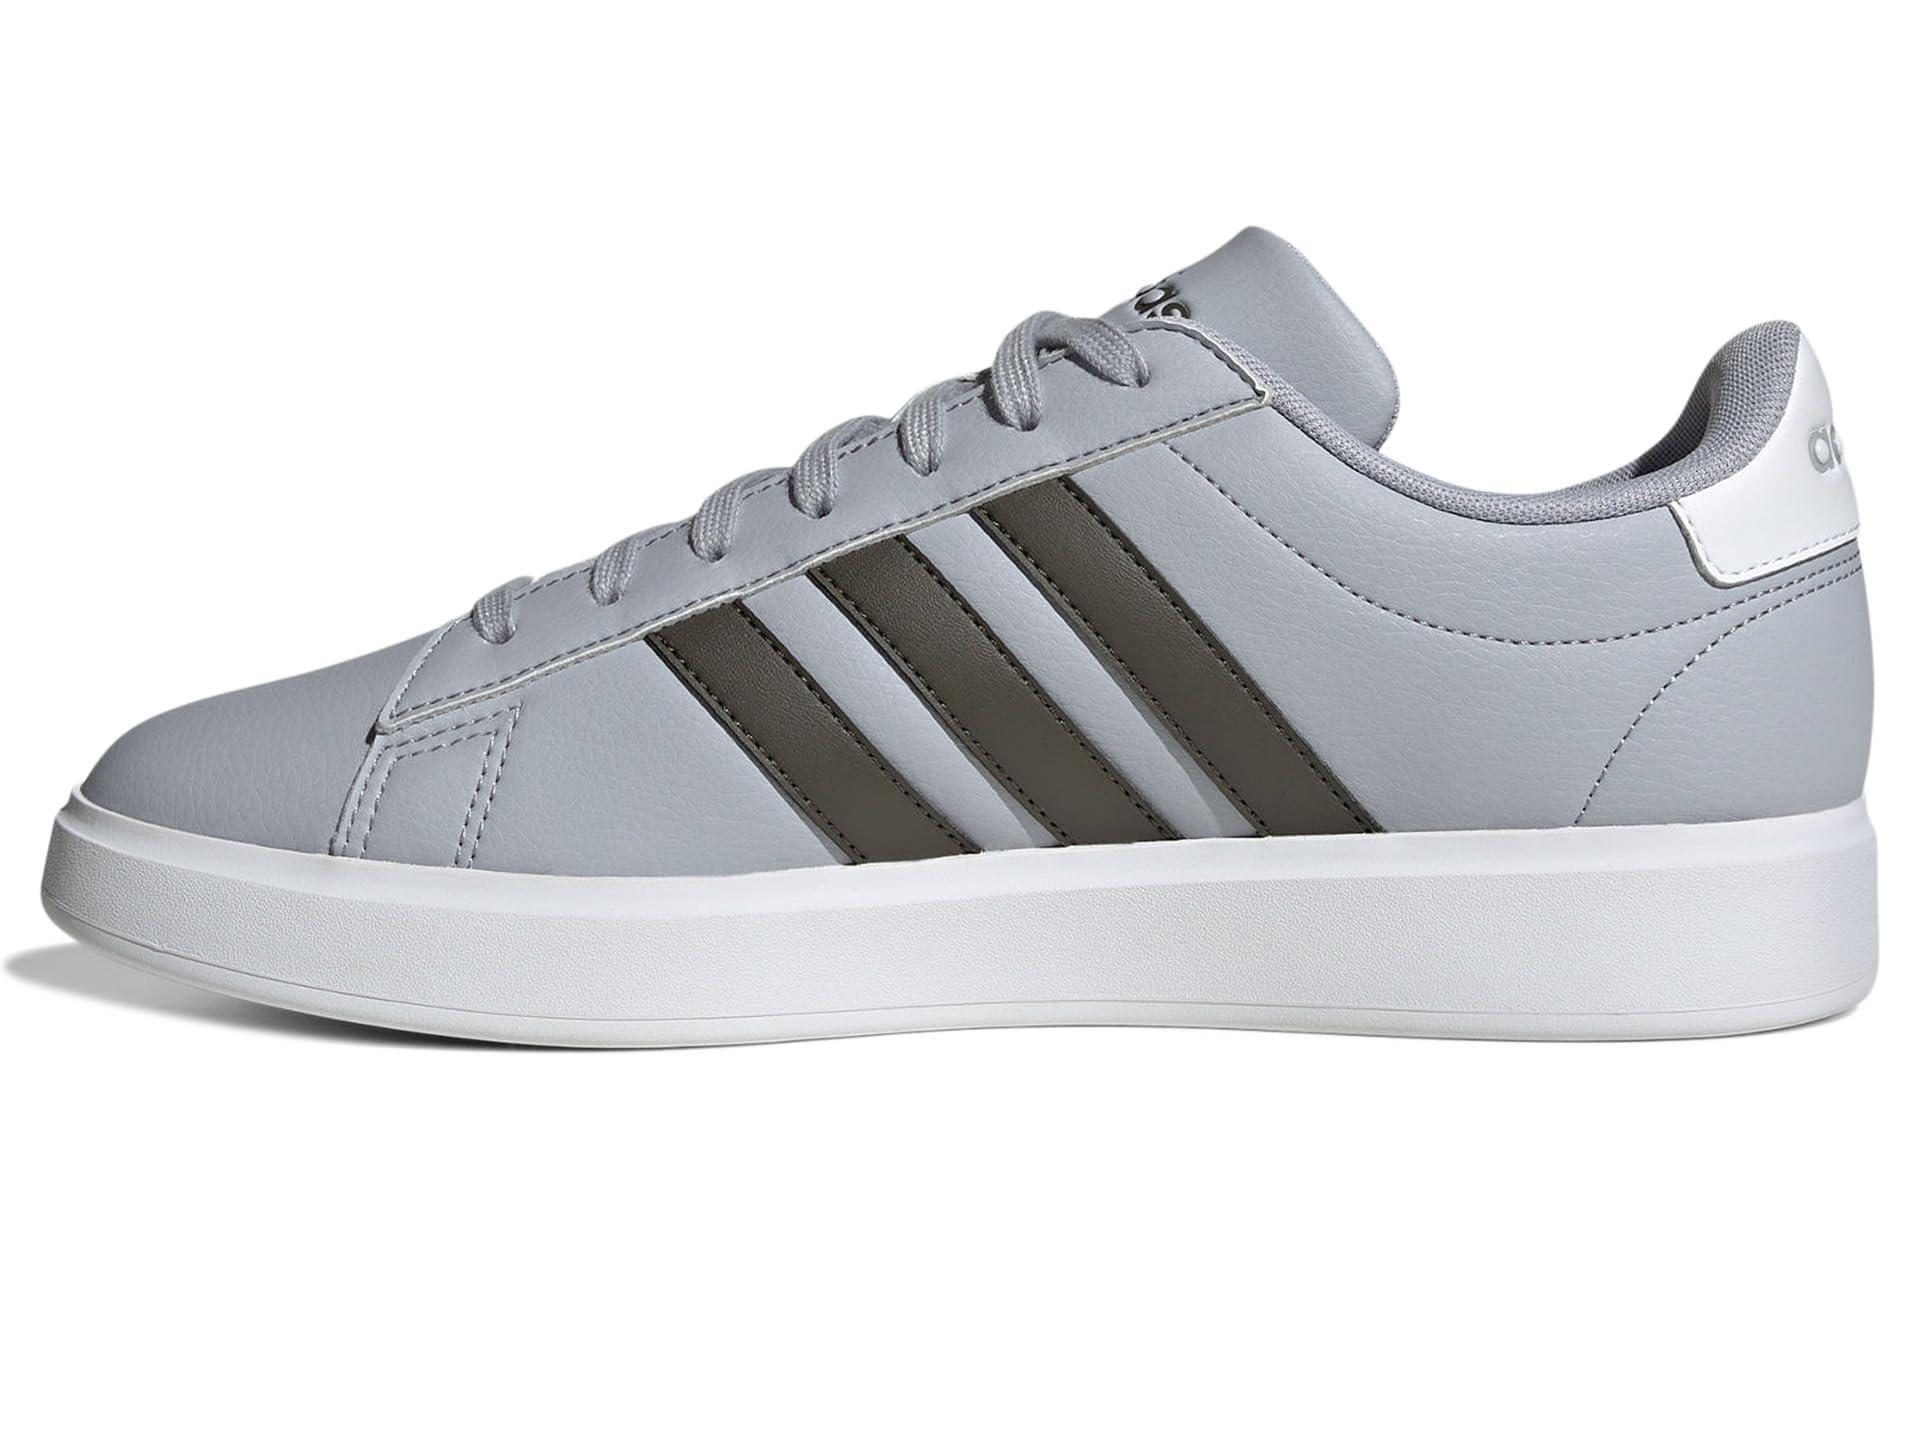 adidas Originals Grand Court 2.0 Halo Silver/shadow Olive/footwear White 9  D in Gray for Men